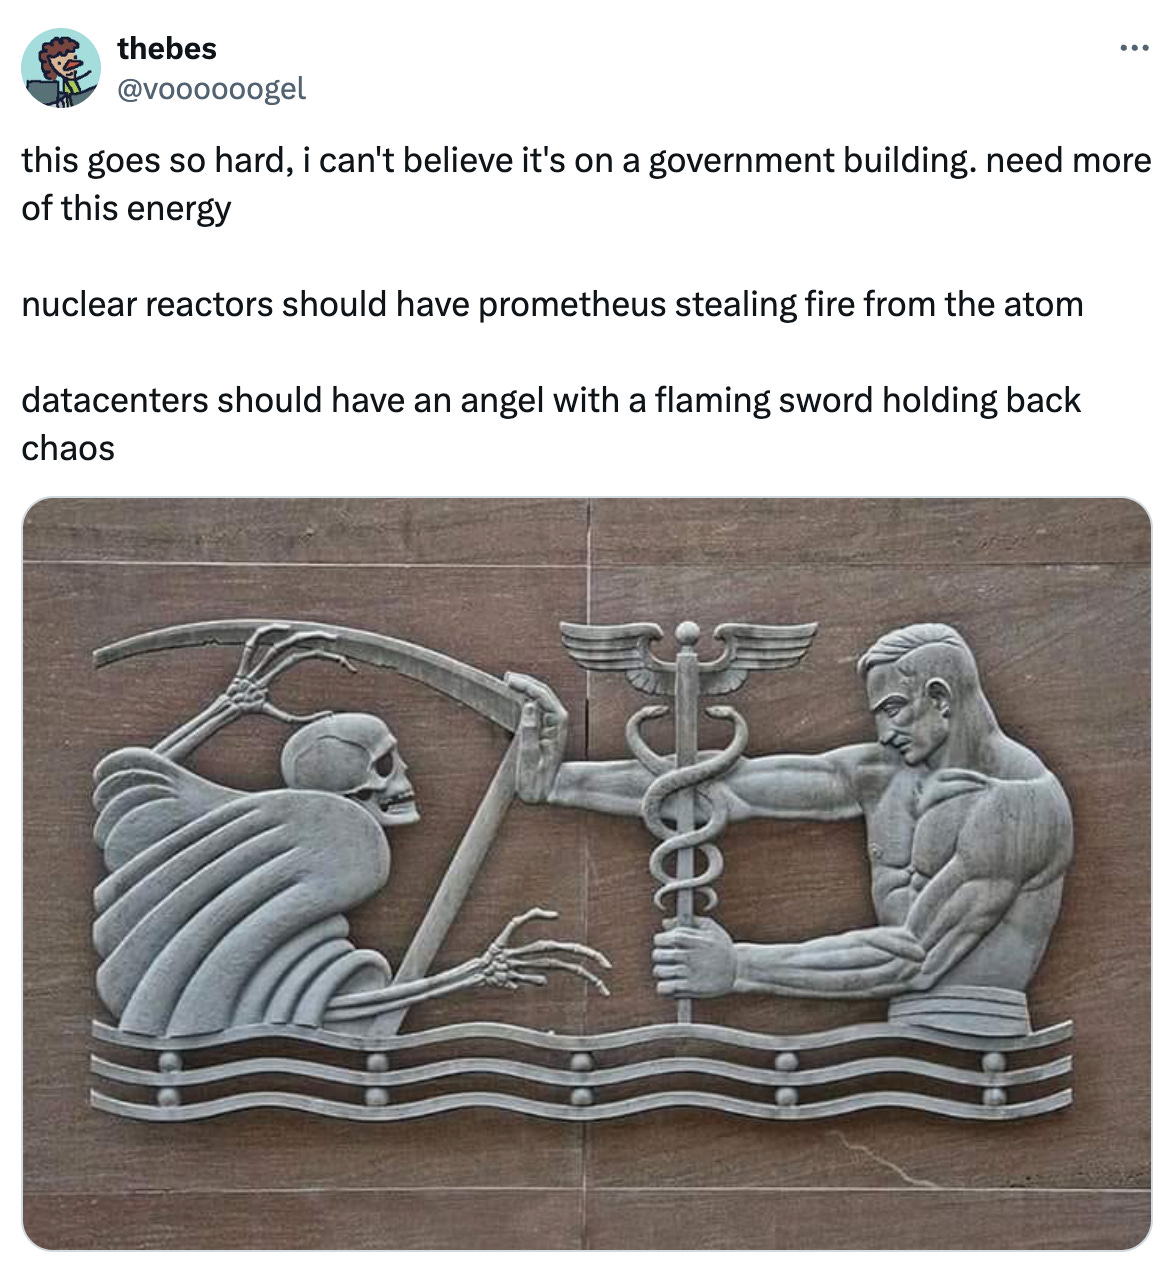 Post See new posts Conversation thebes @voooooogel this goes so hard, i can't believe it's on a government building. need more of this energy  nuclear reactors should have prometheus stealing fire from the atom  datacenters should have an angel with a flaming sword holding back chaos